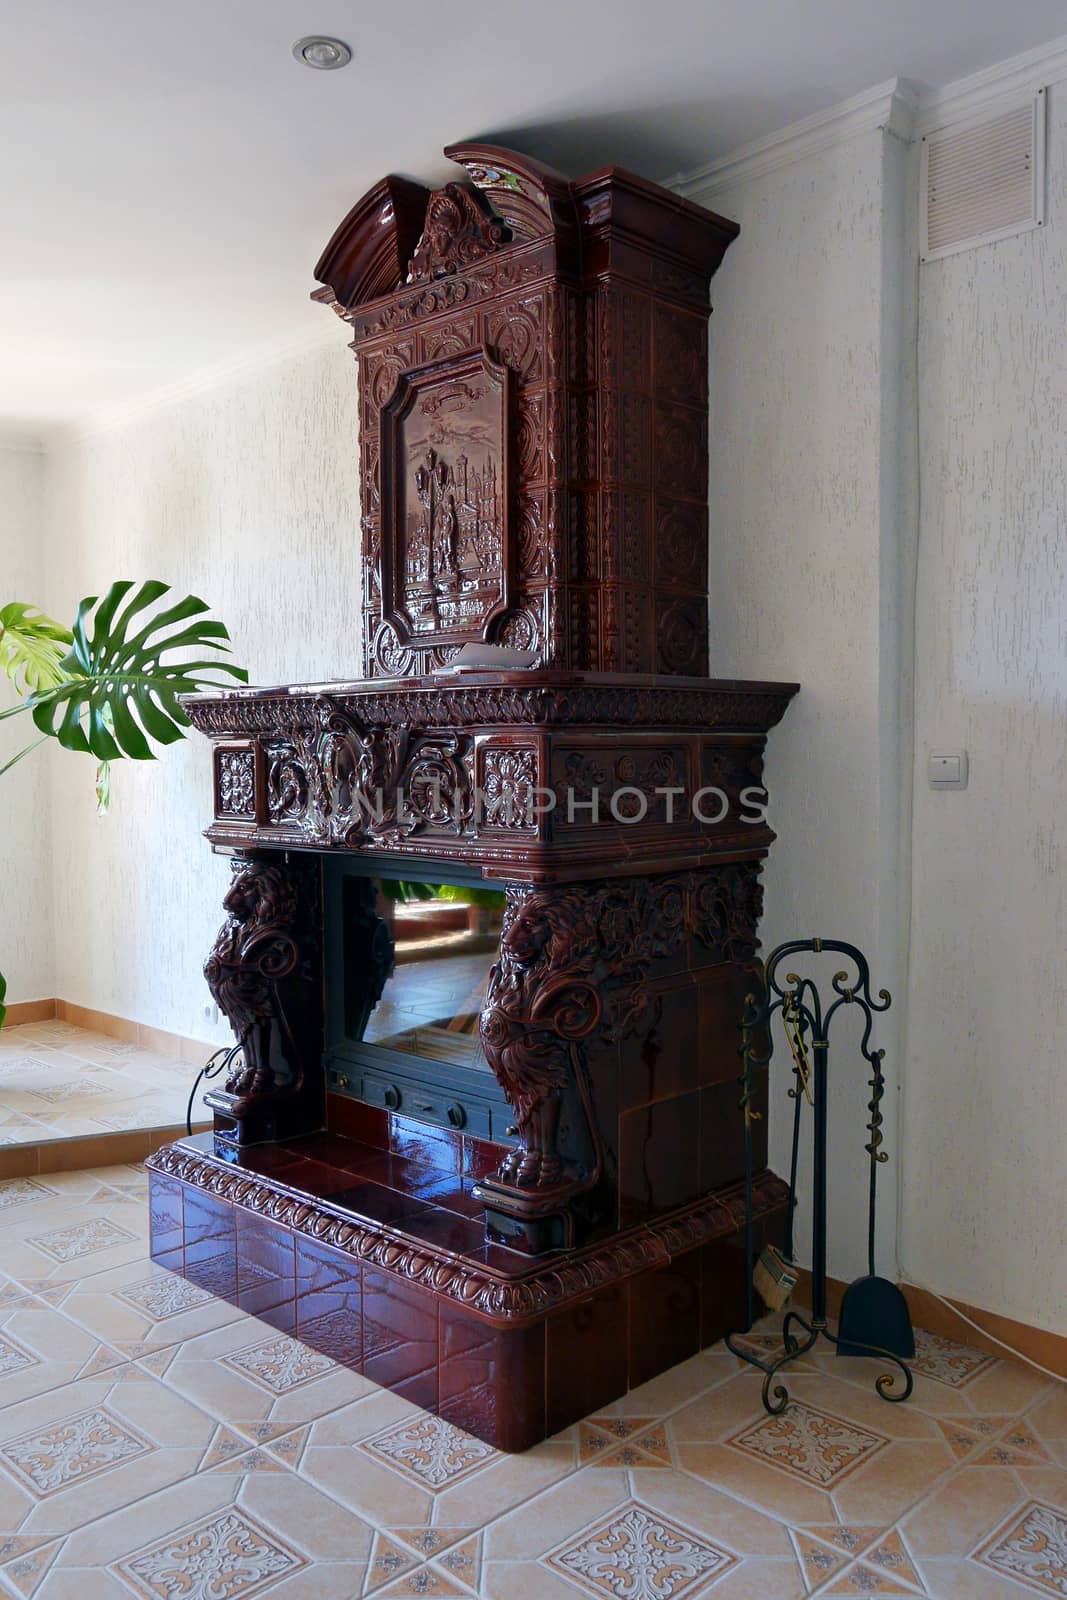 Beautiful stone decorative fireplace with a scoop and brush for cleaning coals